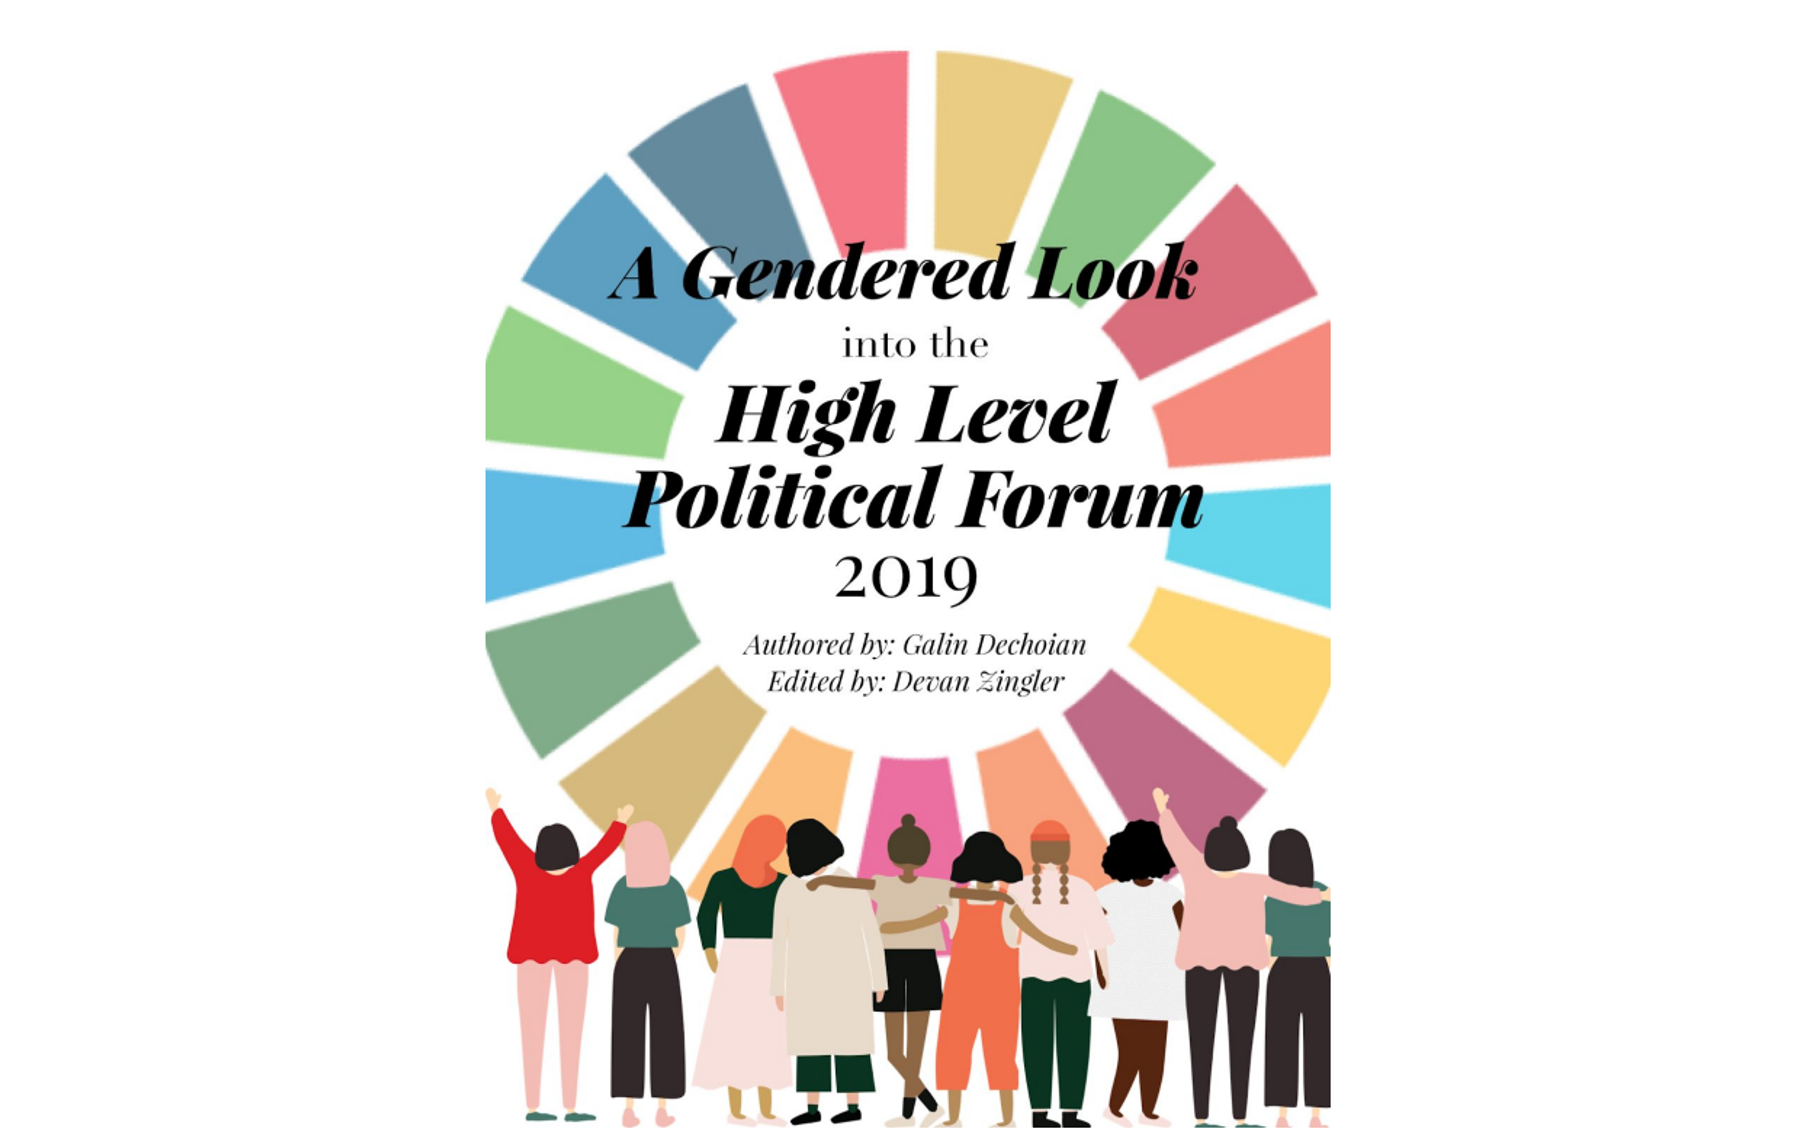 A gendered look into the High Level Political Forum 2019